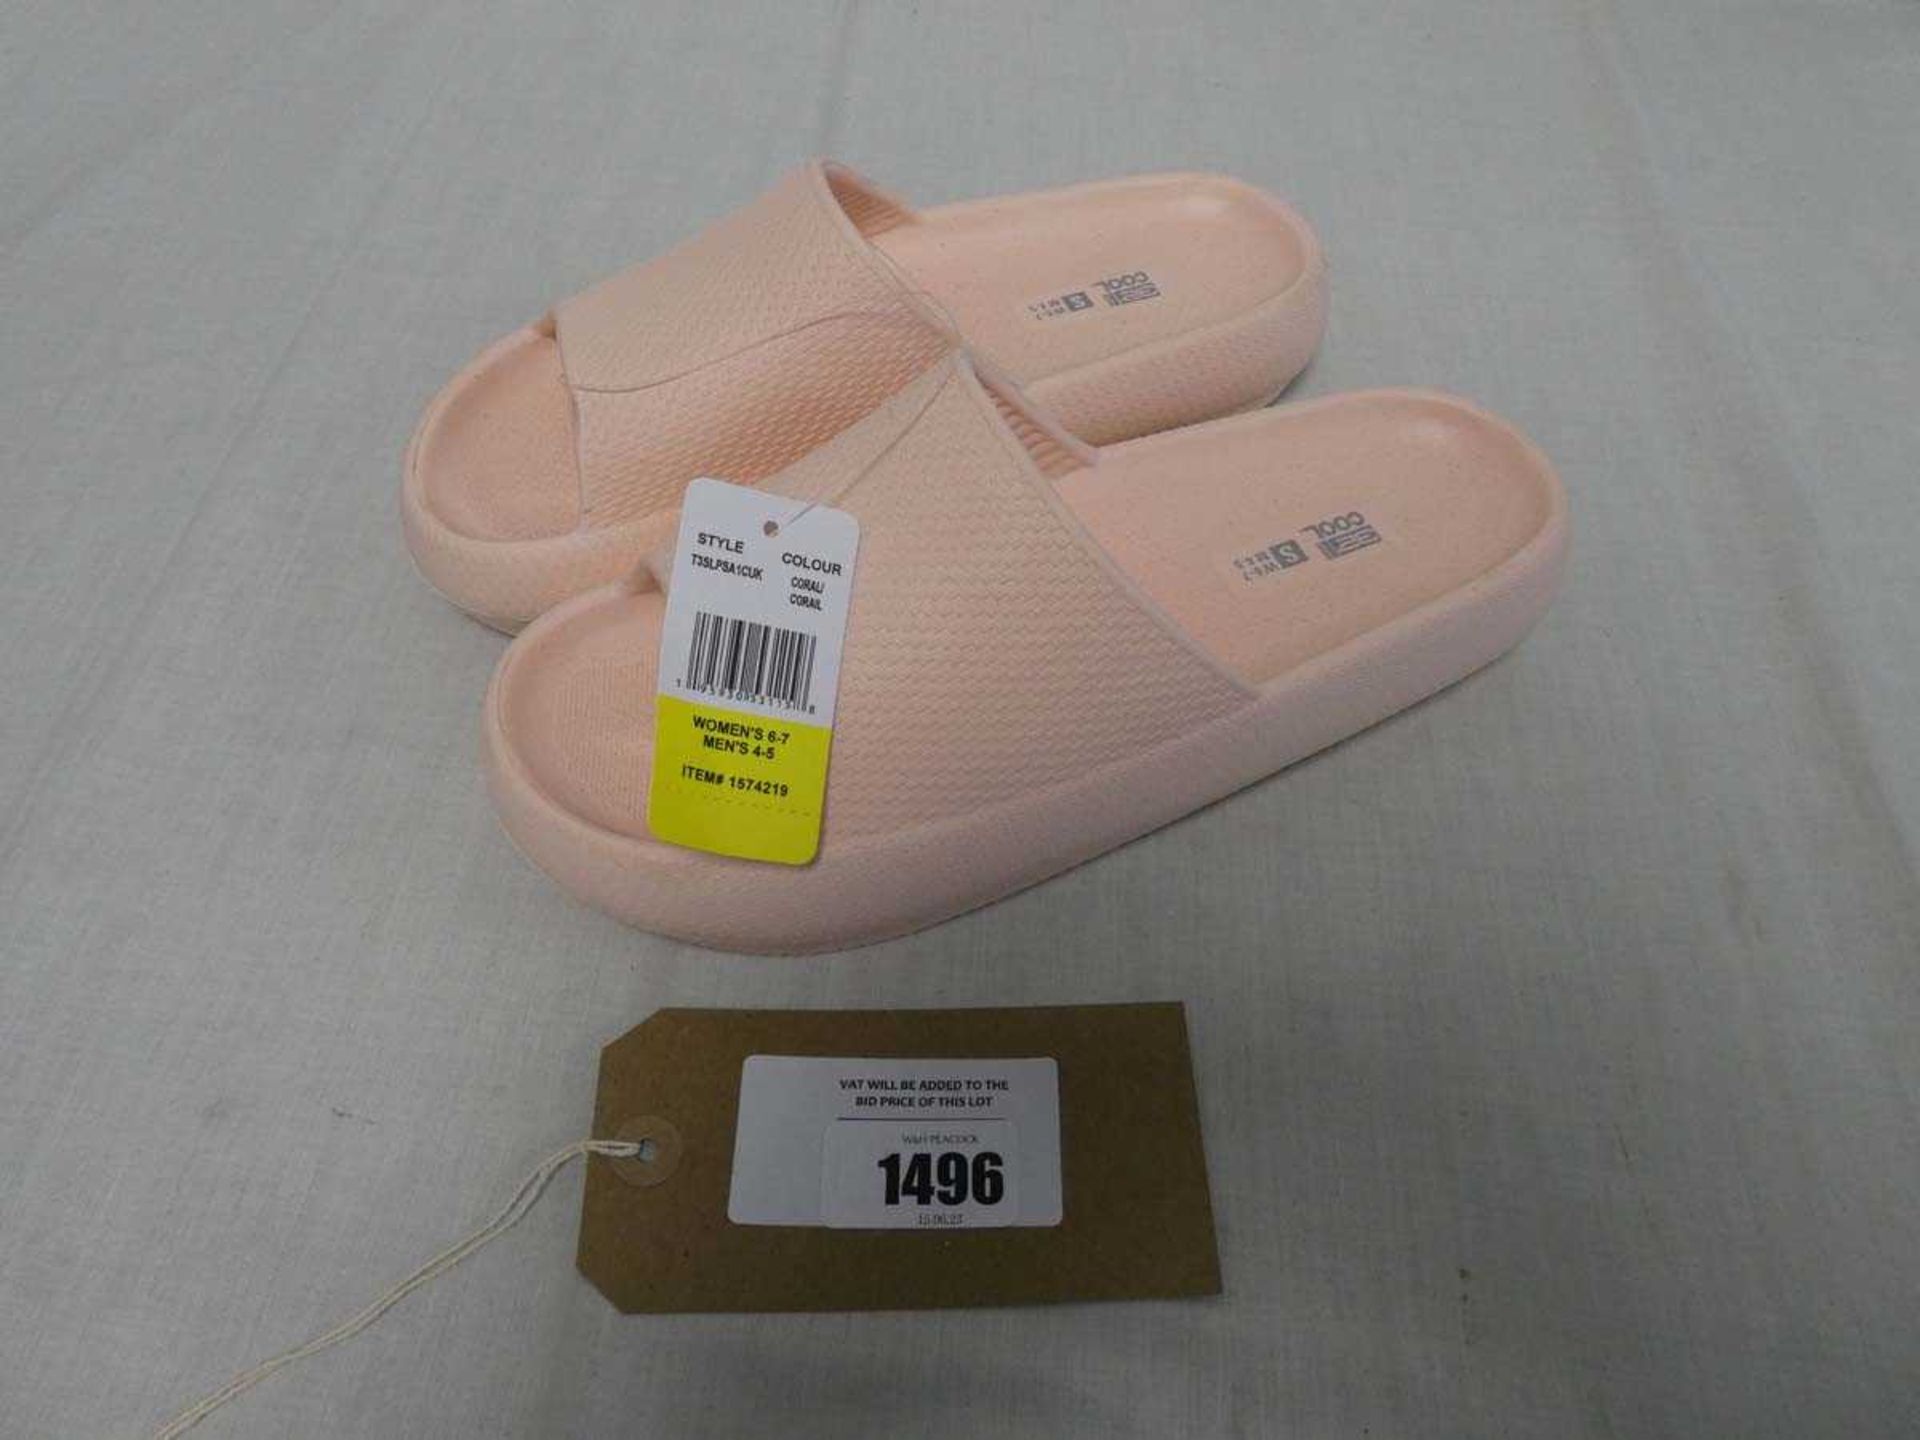 +VAT Pair of women's 32 Degree Cool cushion sliders in coral size S (women's UK6-7) - unboxed